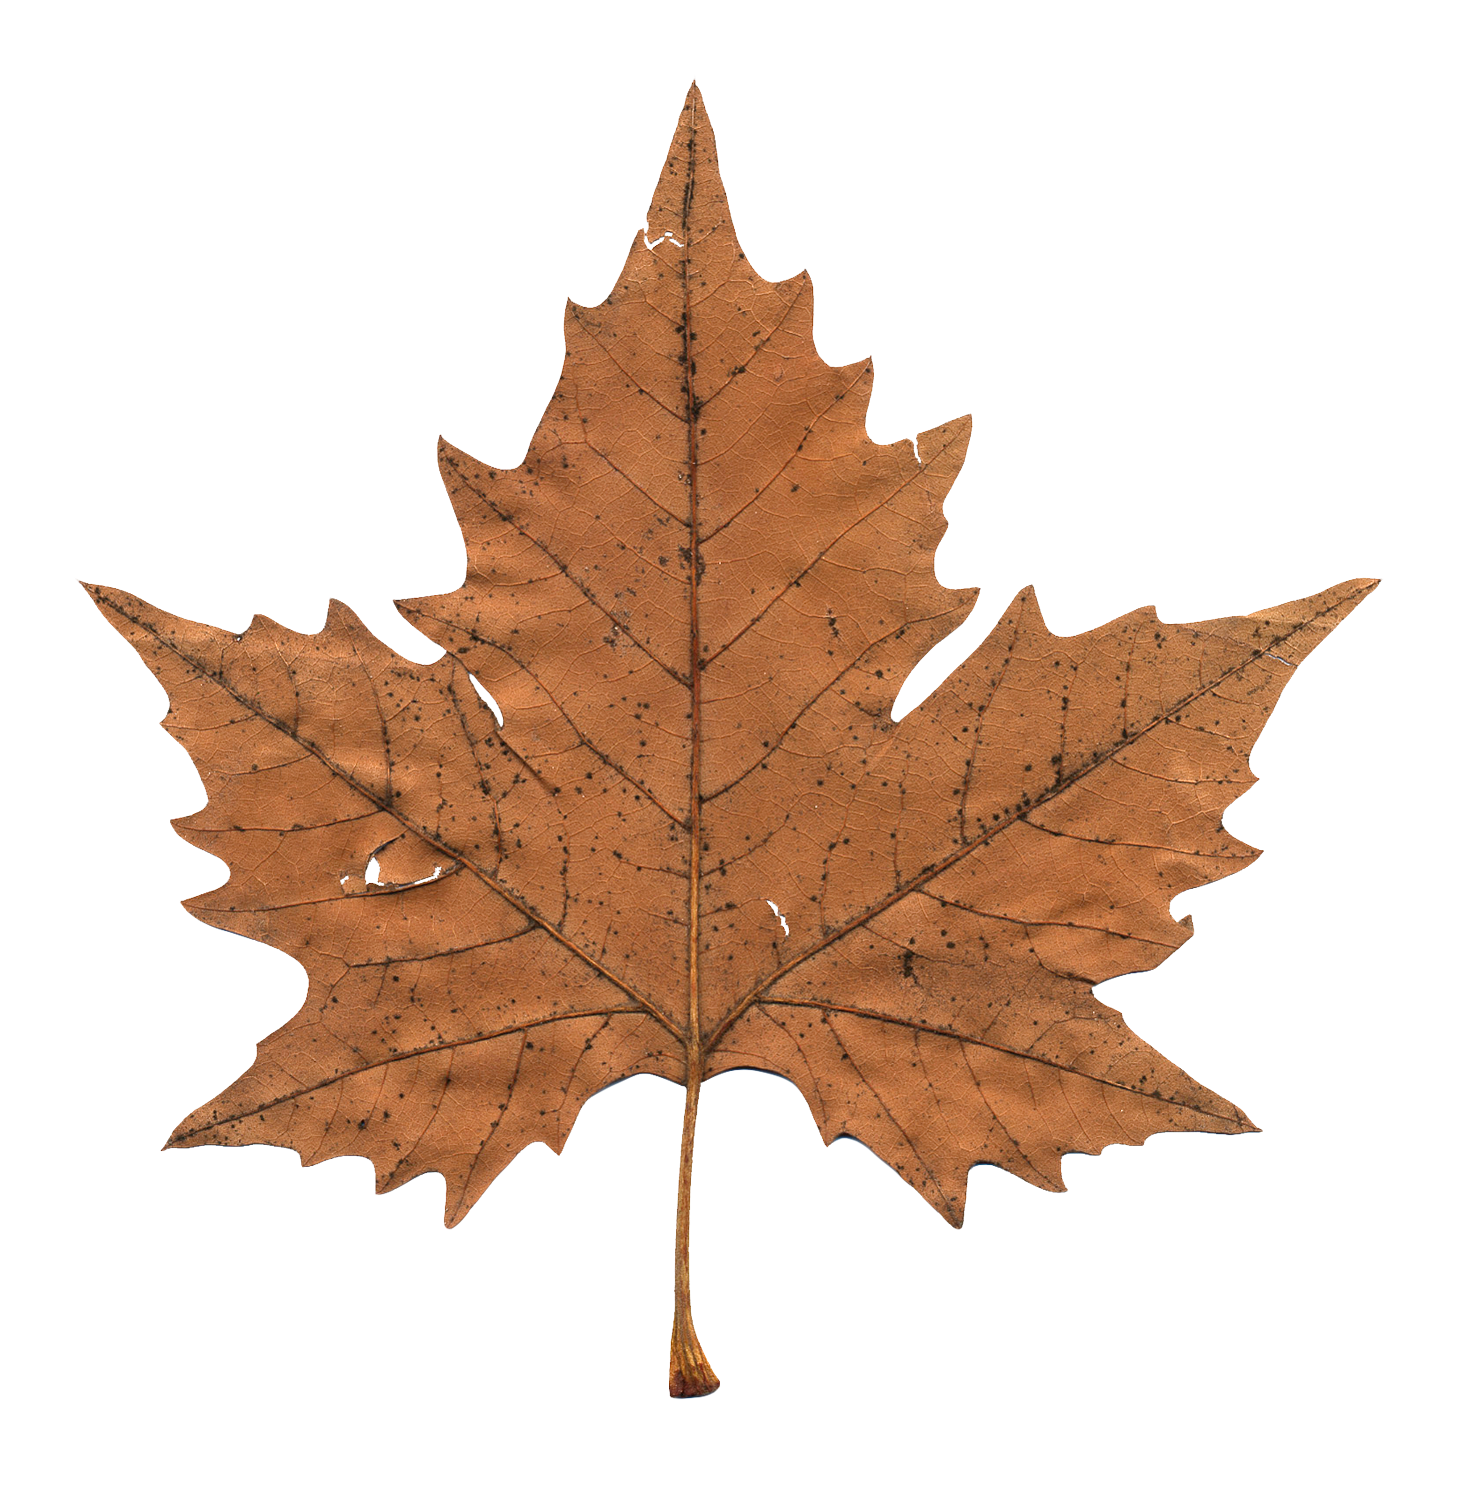 Hdpng - Maple Leaf, Transparent background PNG HD thumbnail